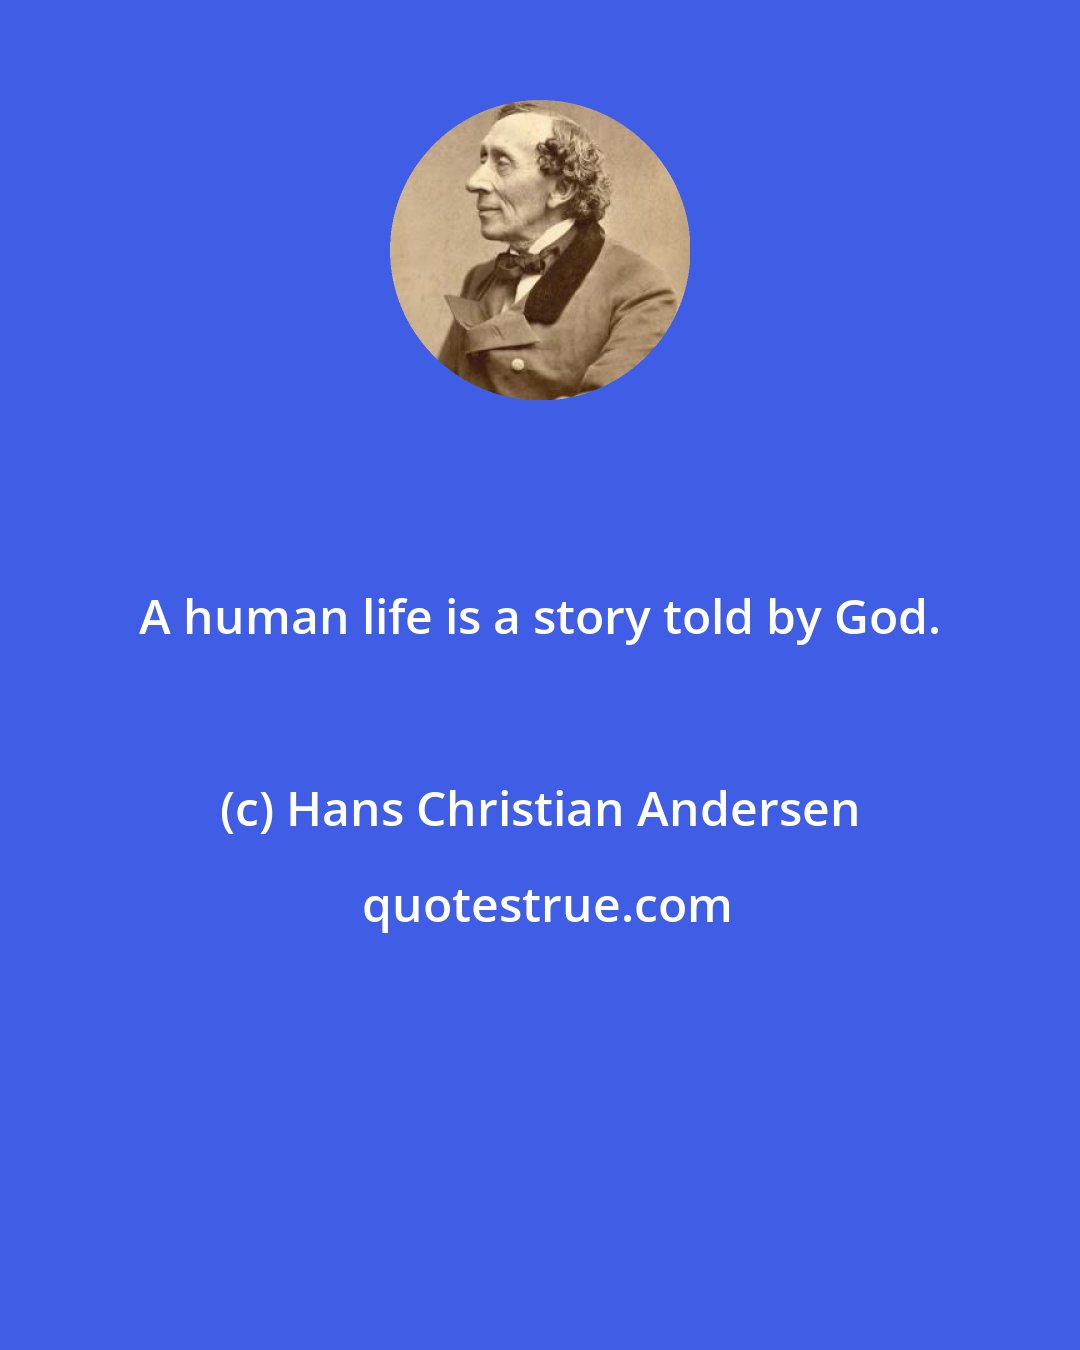 Hans Christian Andersen: A human life is a story told by God.